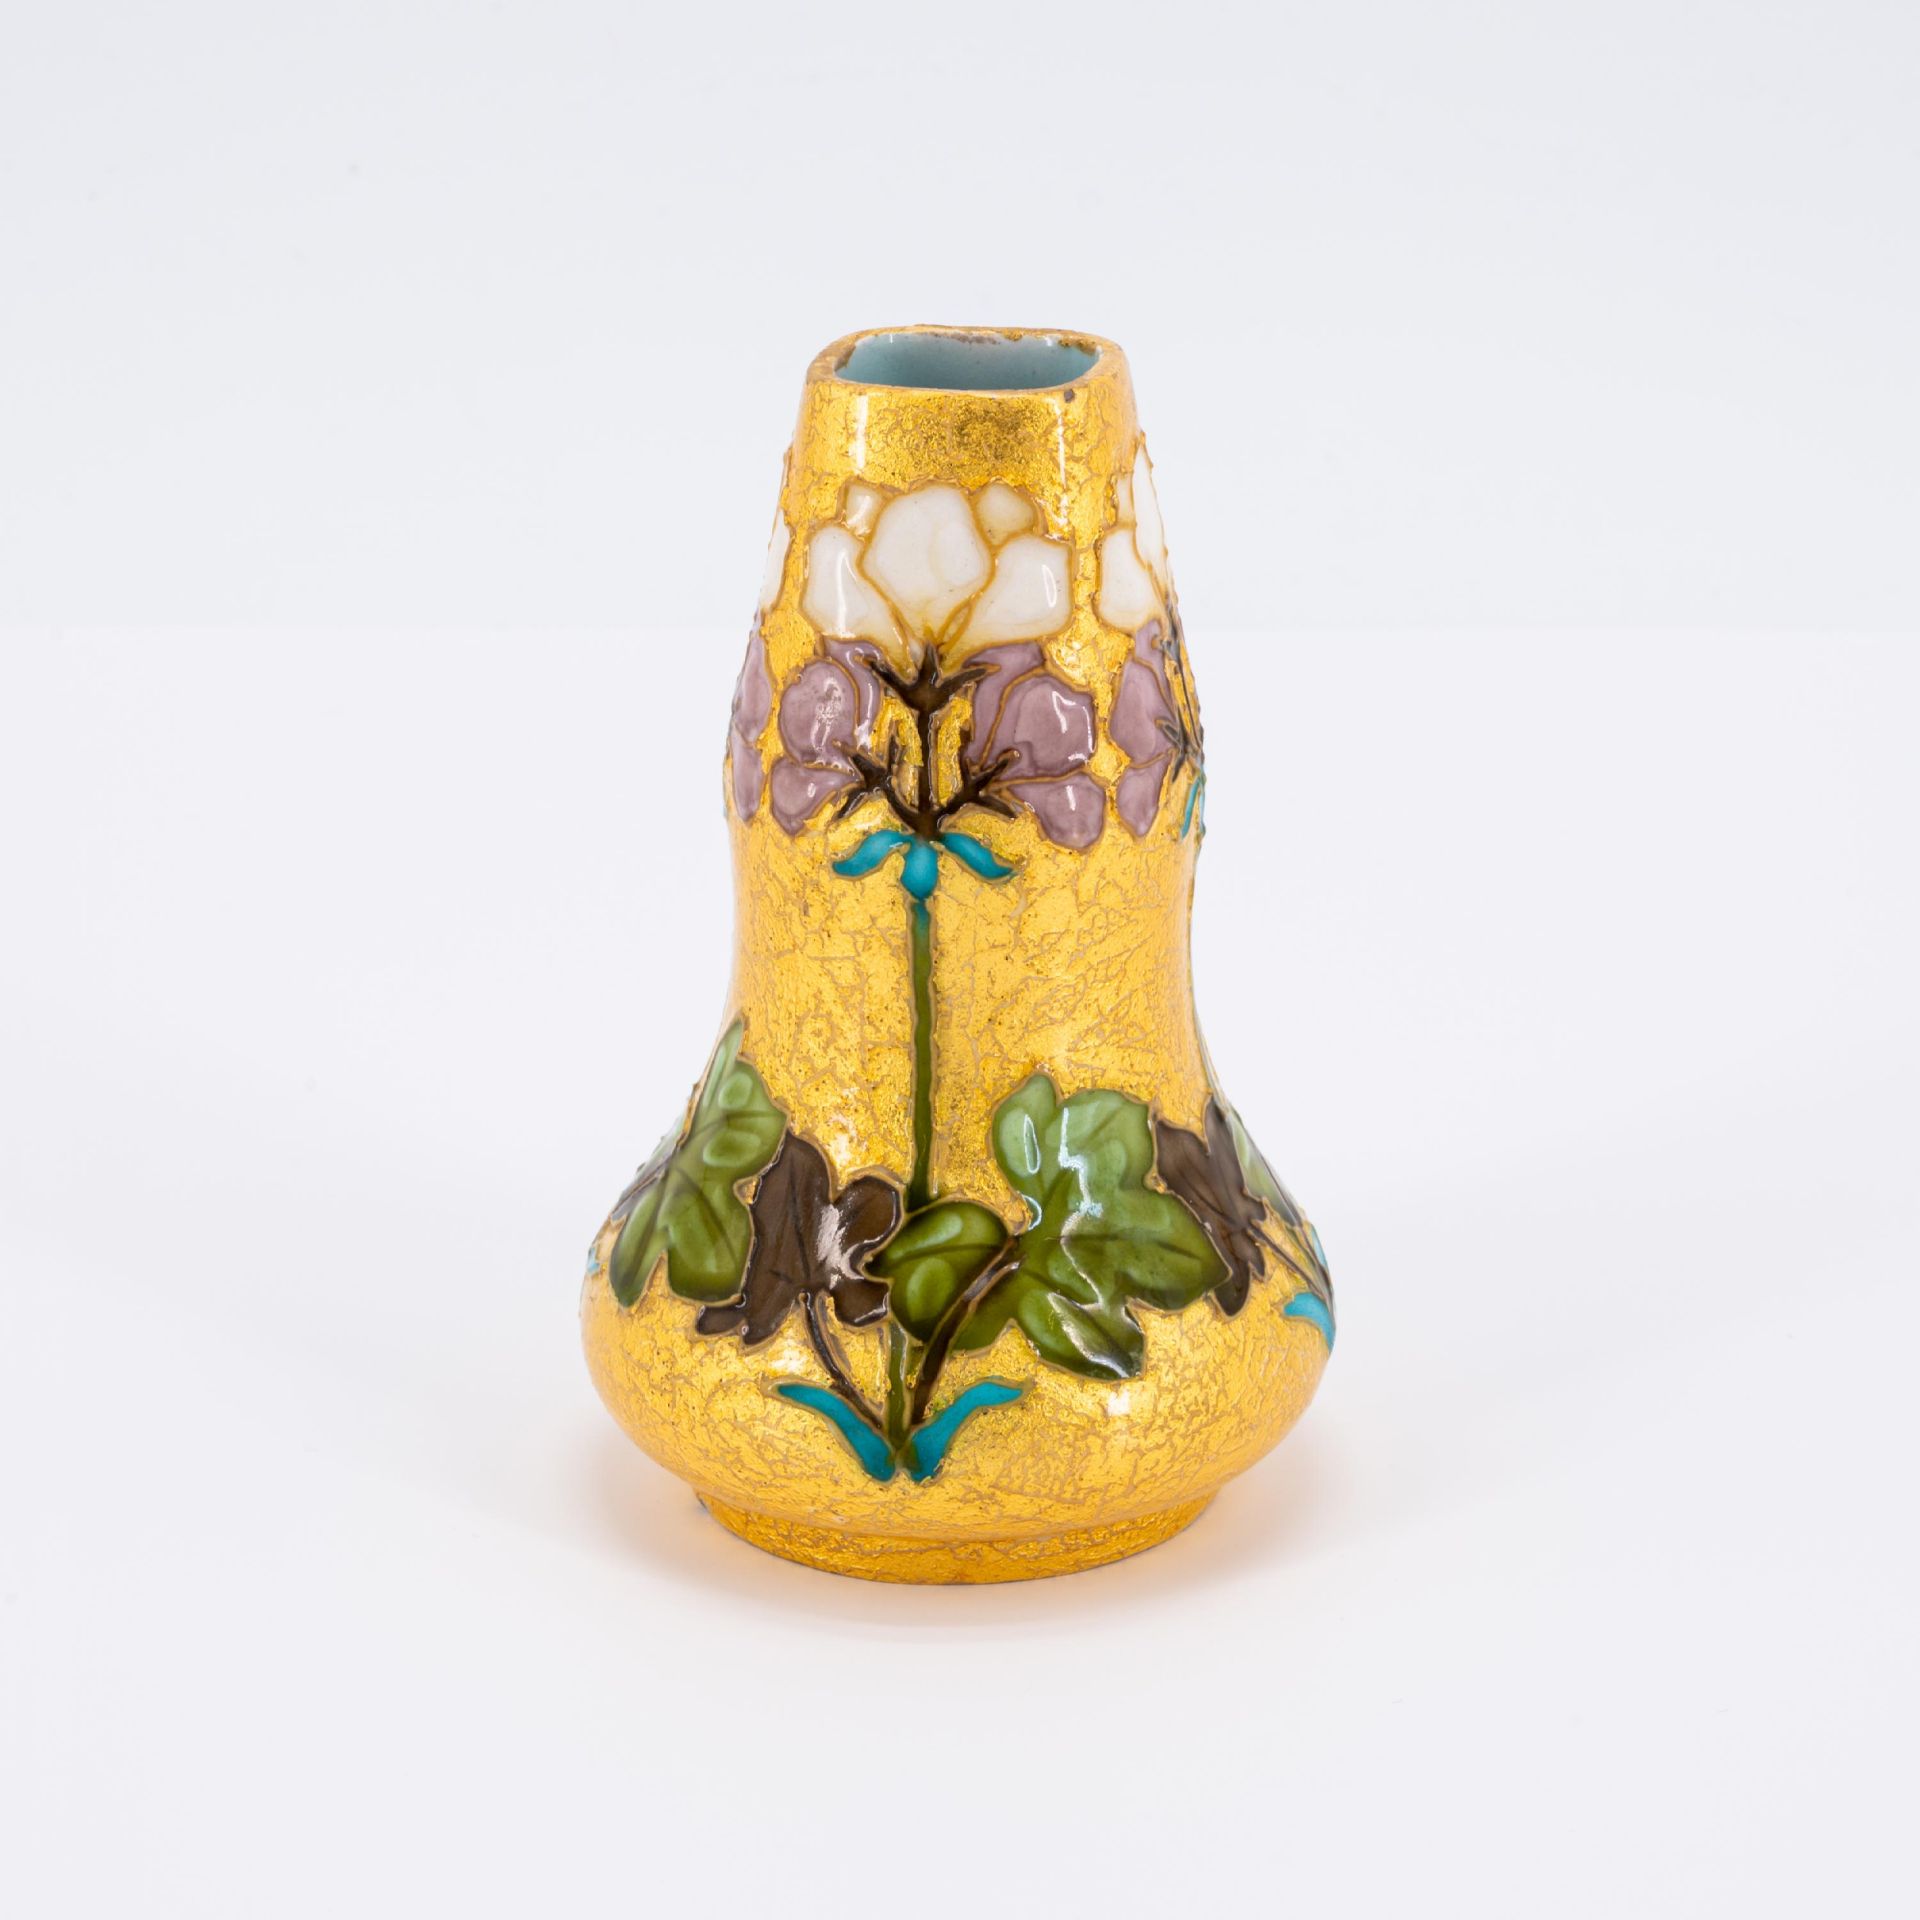 Small vase with floral decor - Image 4 of 7